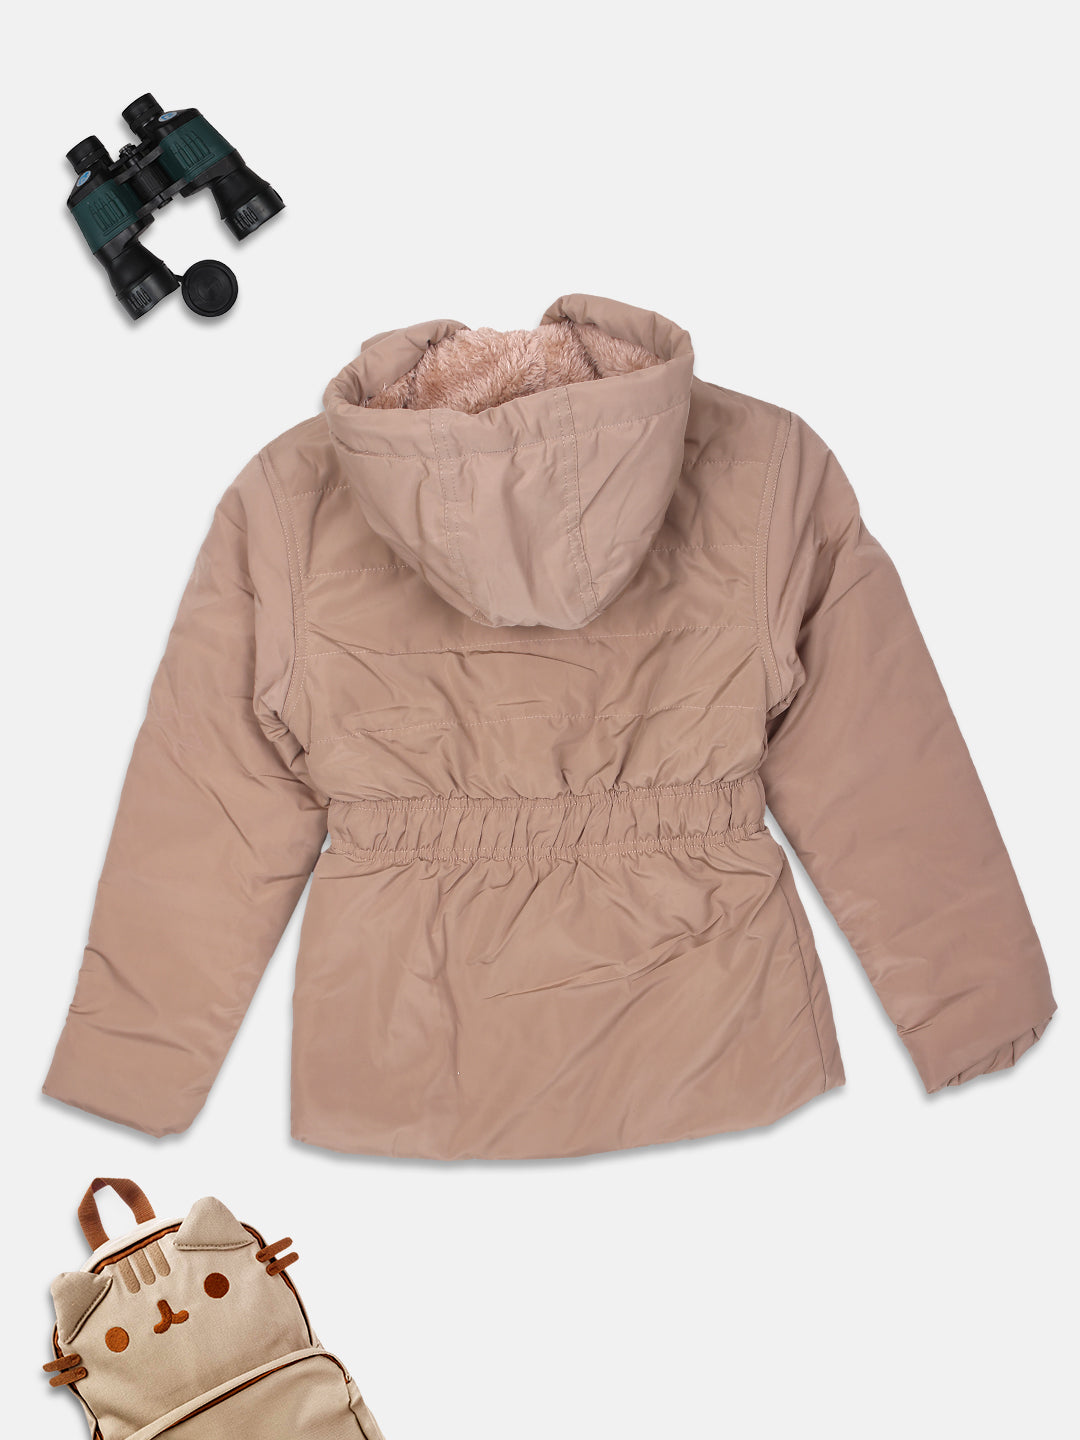 ZIAMA GIRLS SOLID FULL SELEVE WITH HODDIE & ZIPPER JACKET-FAWN